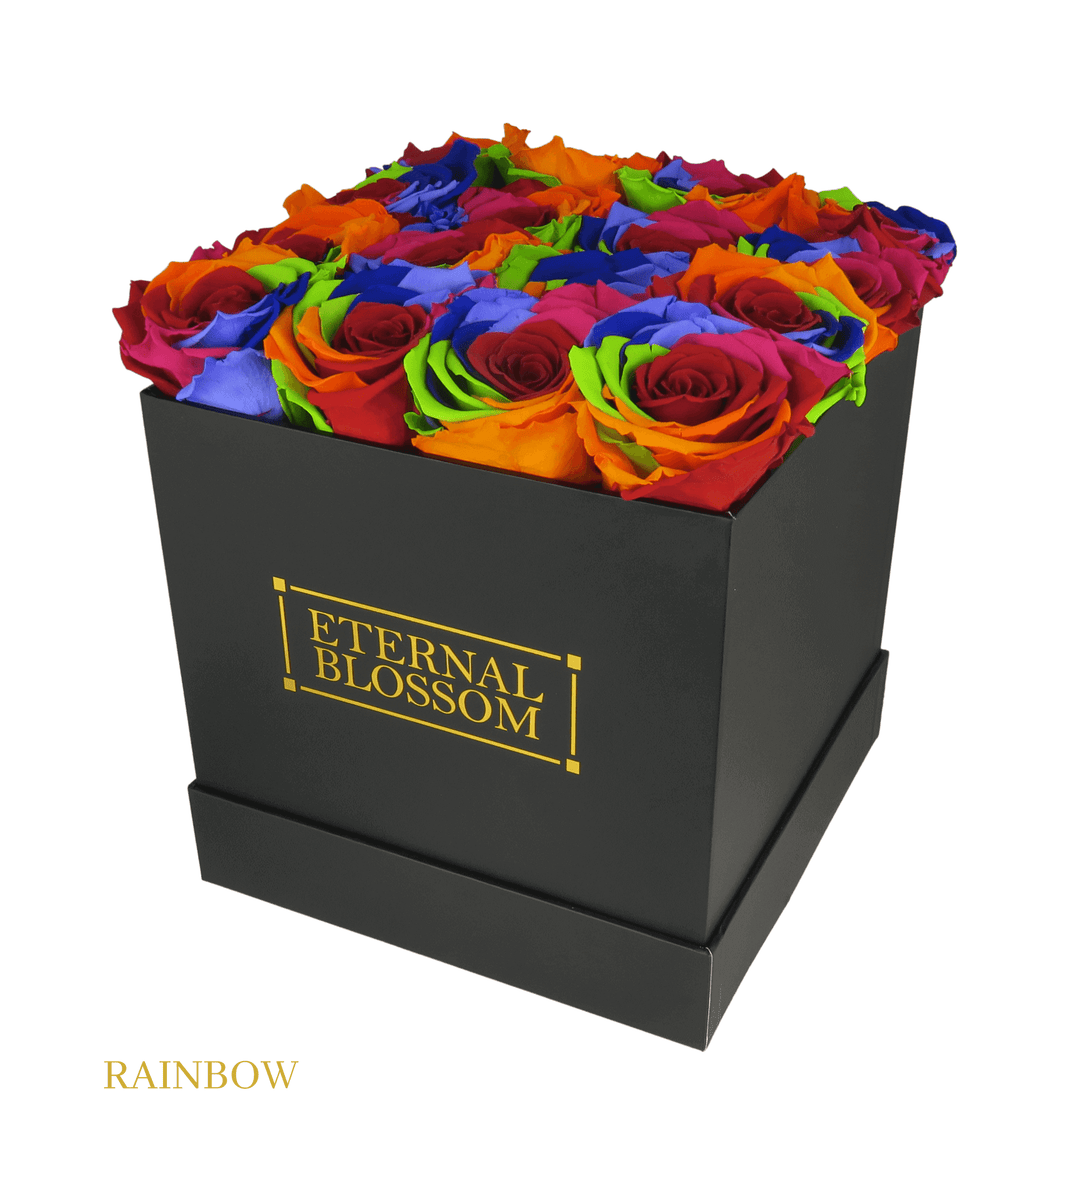 16 Piece Blossom Box - Black Box - All Colours of Year Lasting Infinity Roses - Eternal Blossom